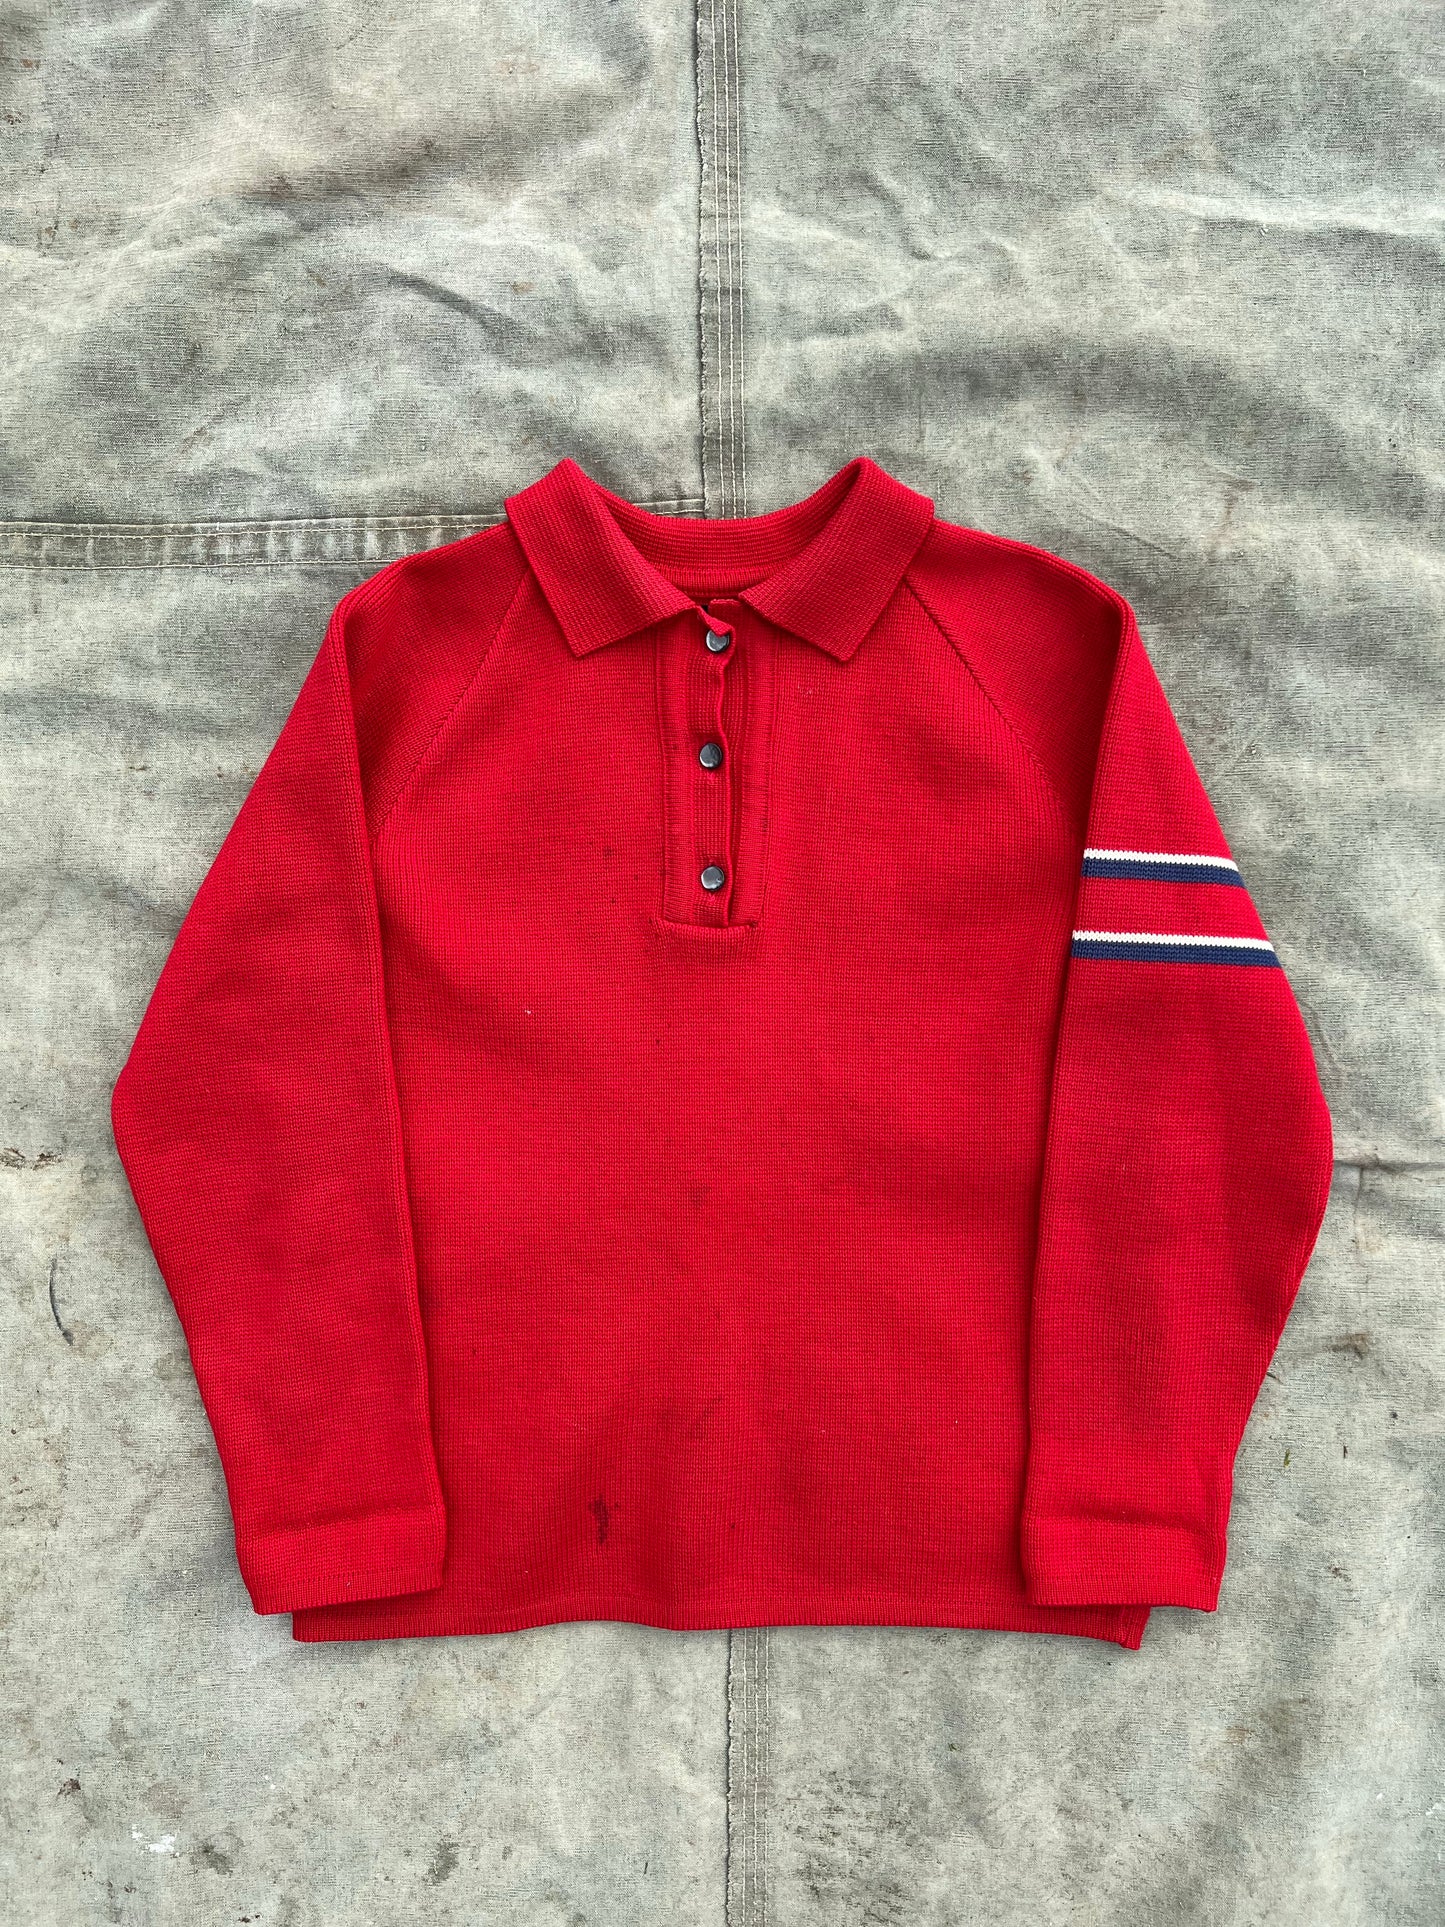 1970s RED SWEATER